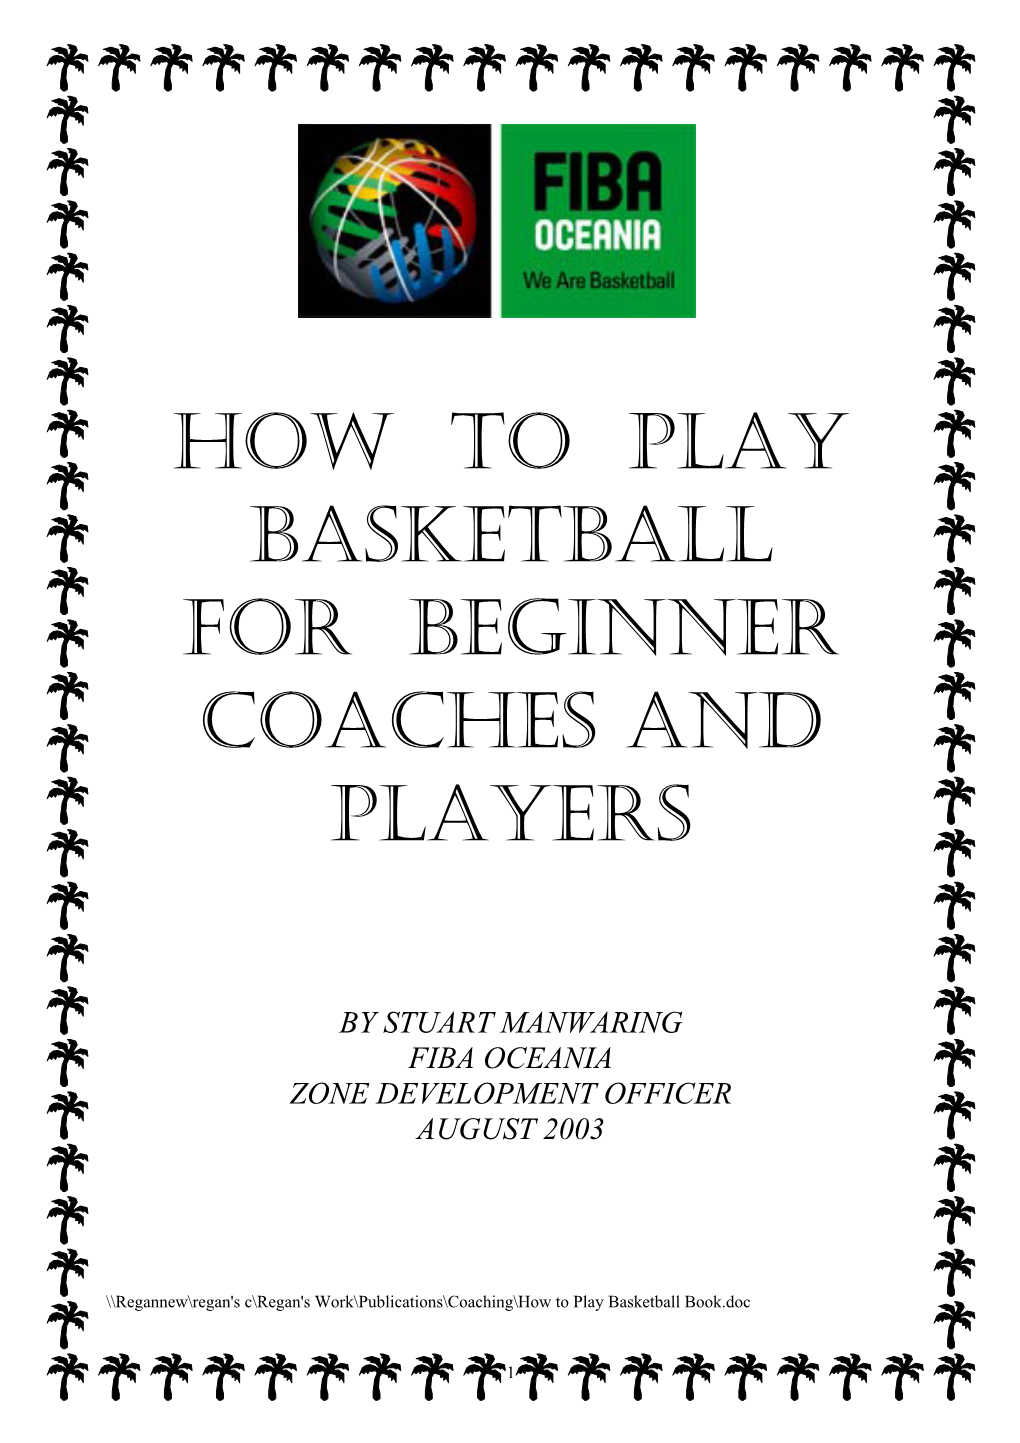 How to Play Basketball for Beginner Coaches and Players